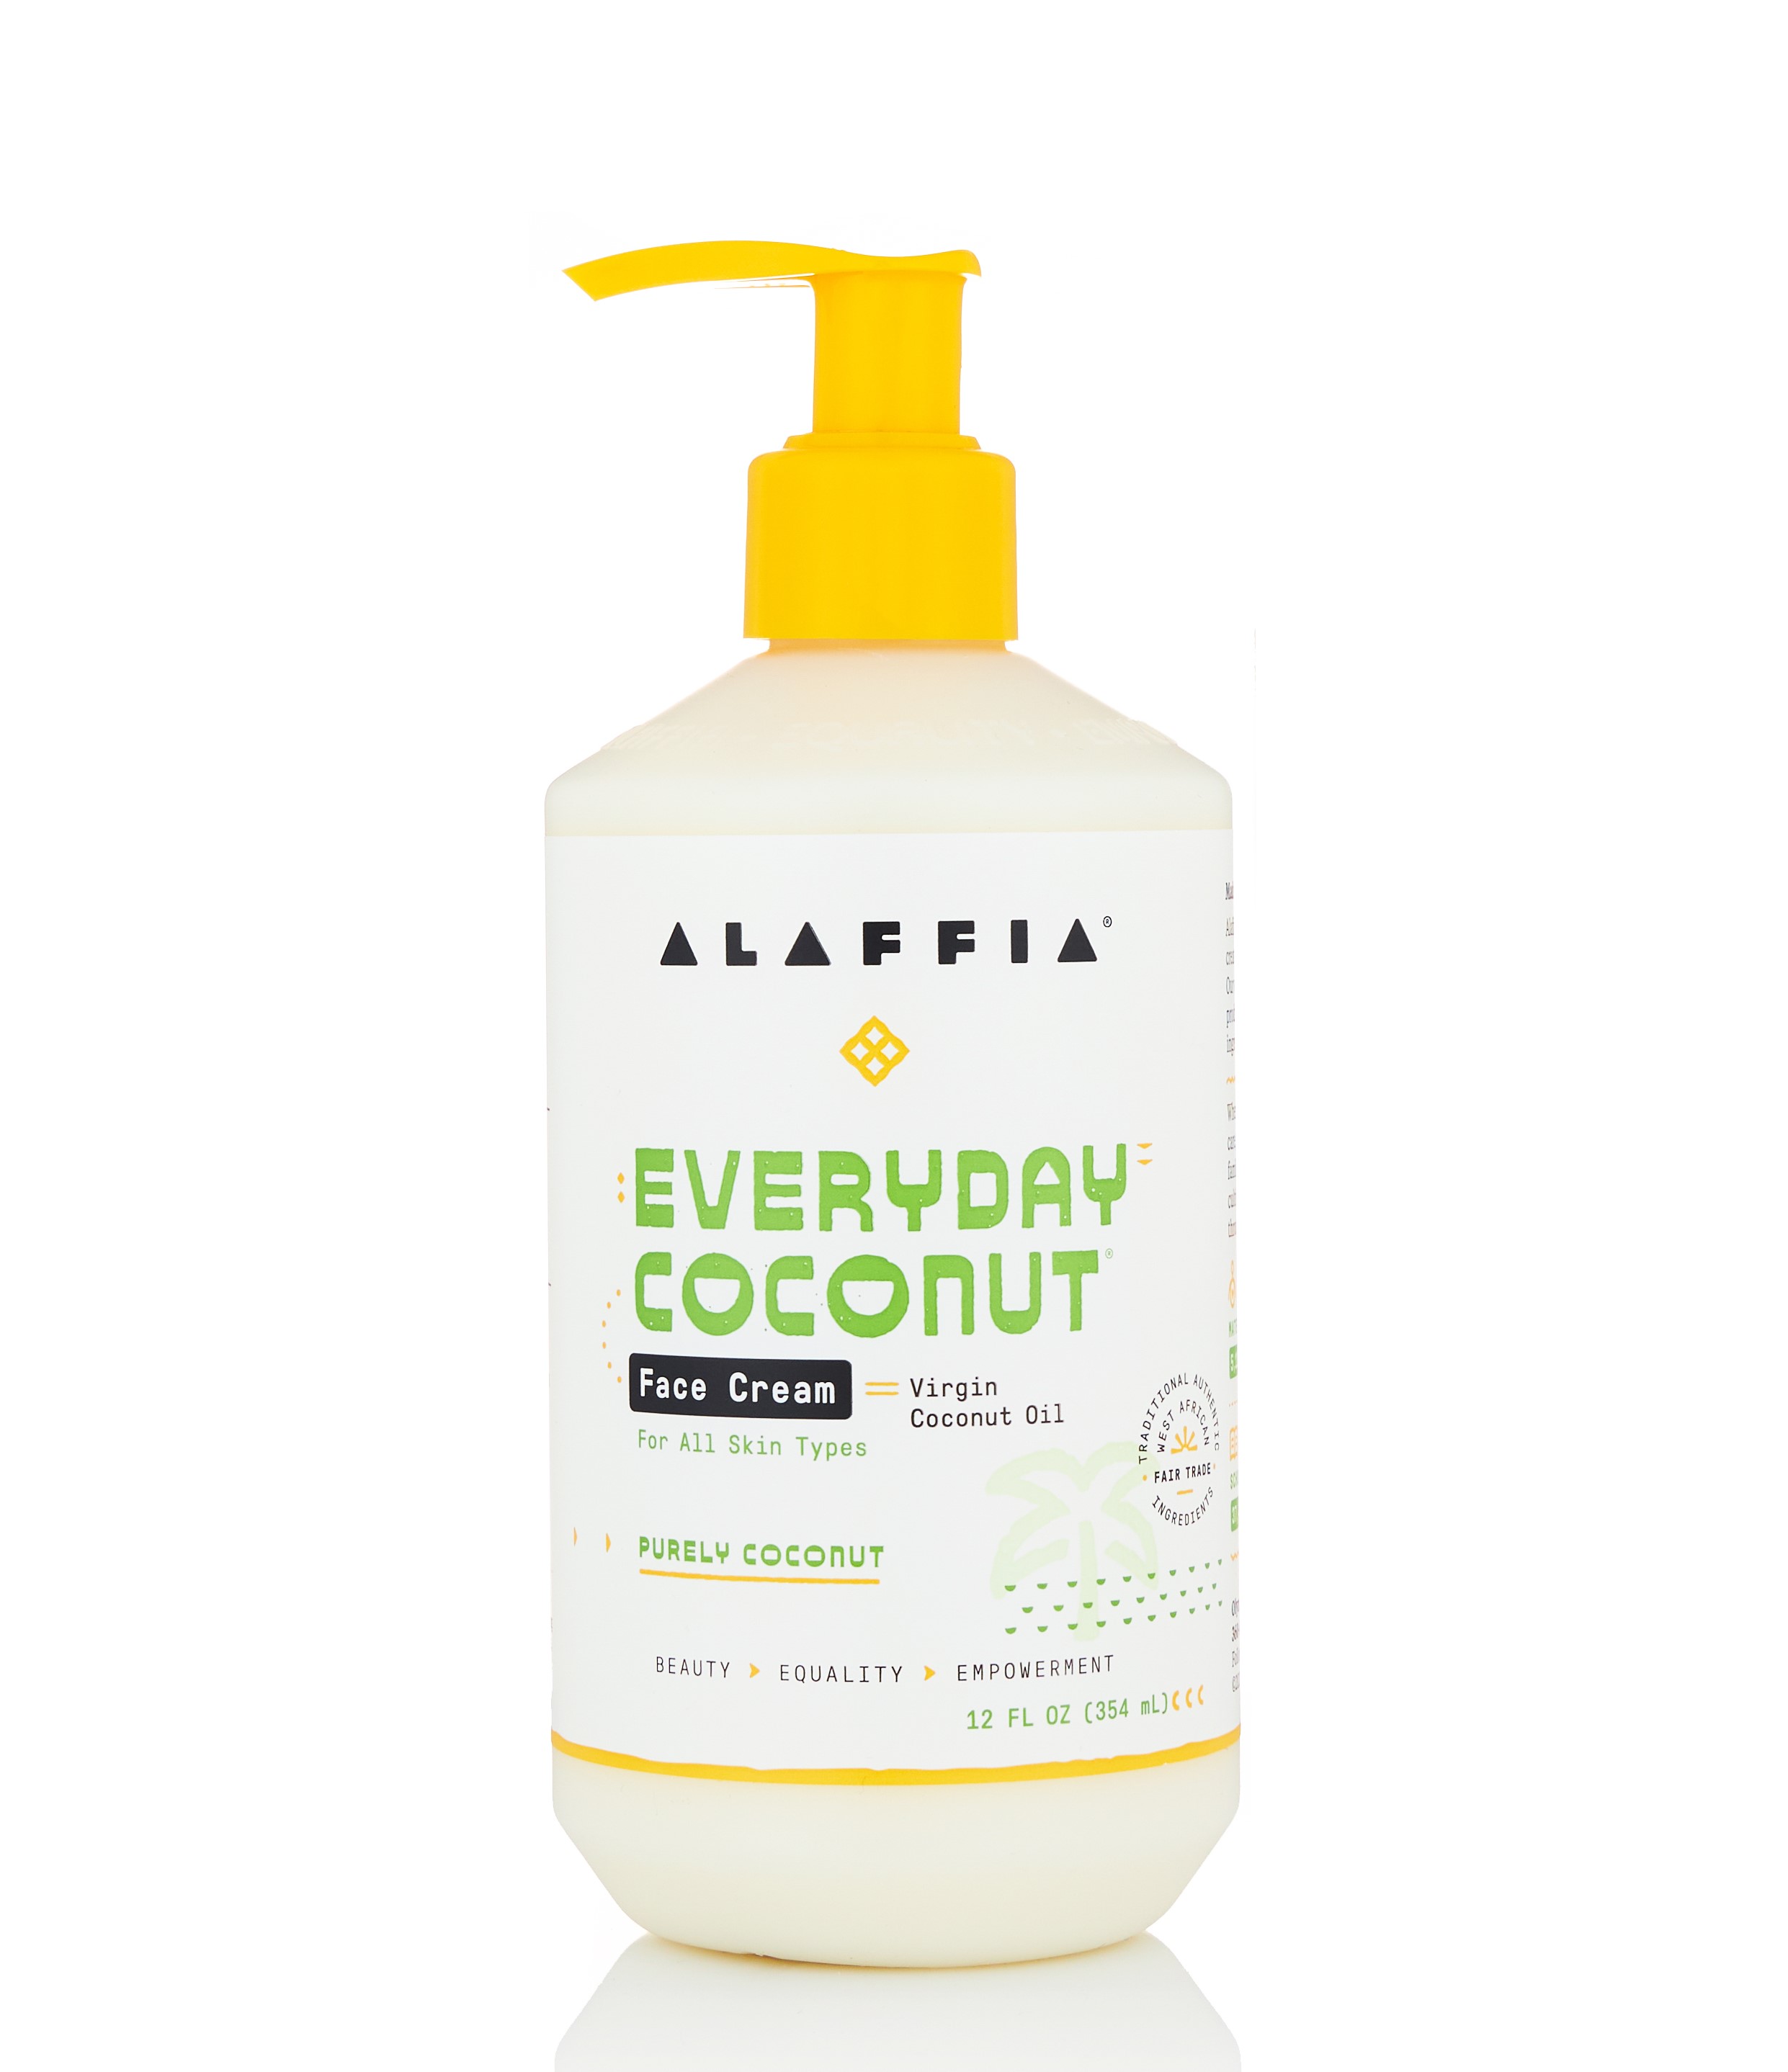 Alaffia Everyday Coconut Face Cream for All Skin Types, Purely Coconut, 12 fl oz - image 1 of 15